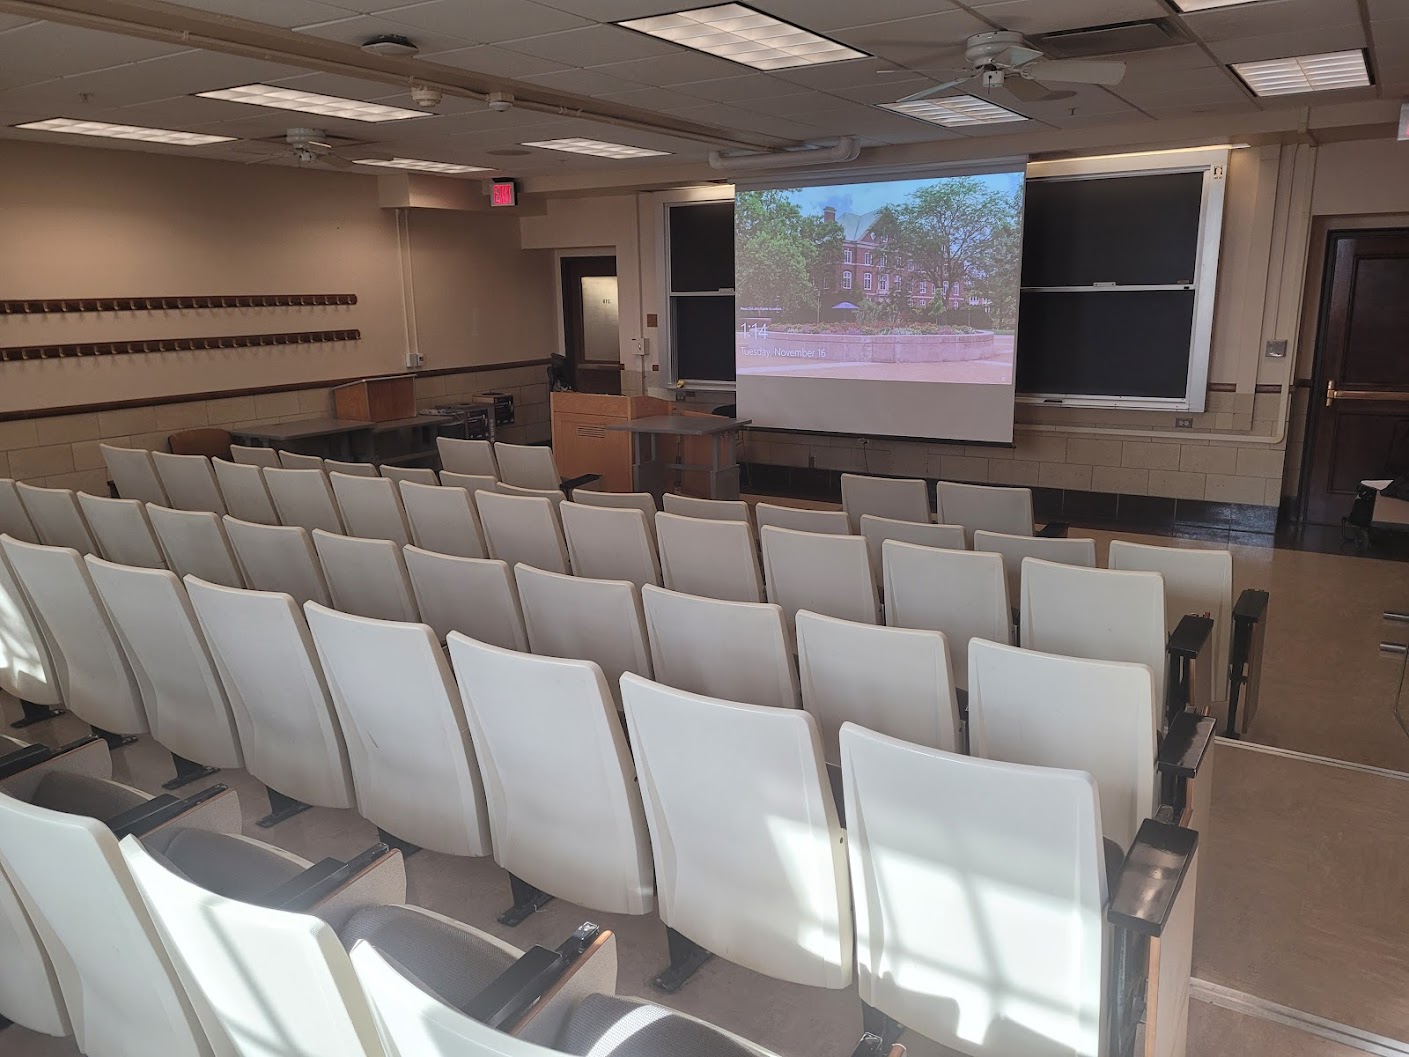 A view of the classroom with fixed auditorium seating, chalkboard, and instructor table in front.